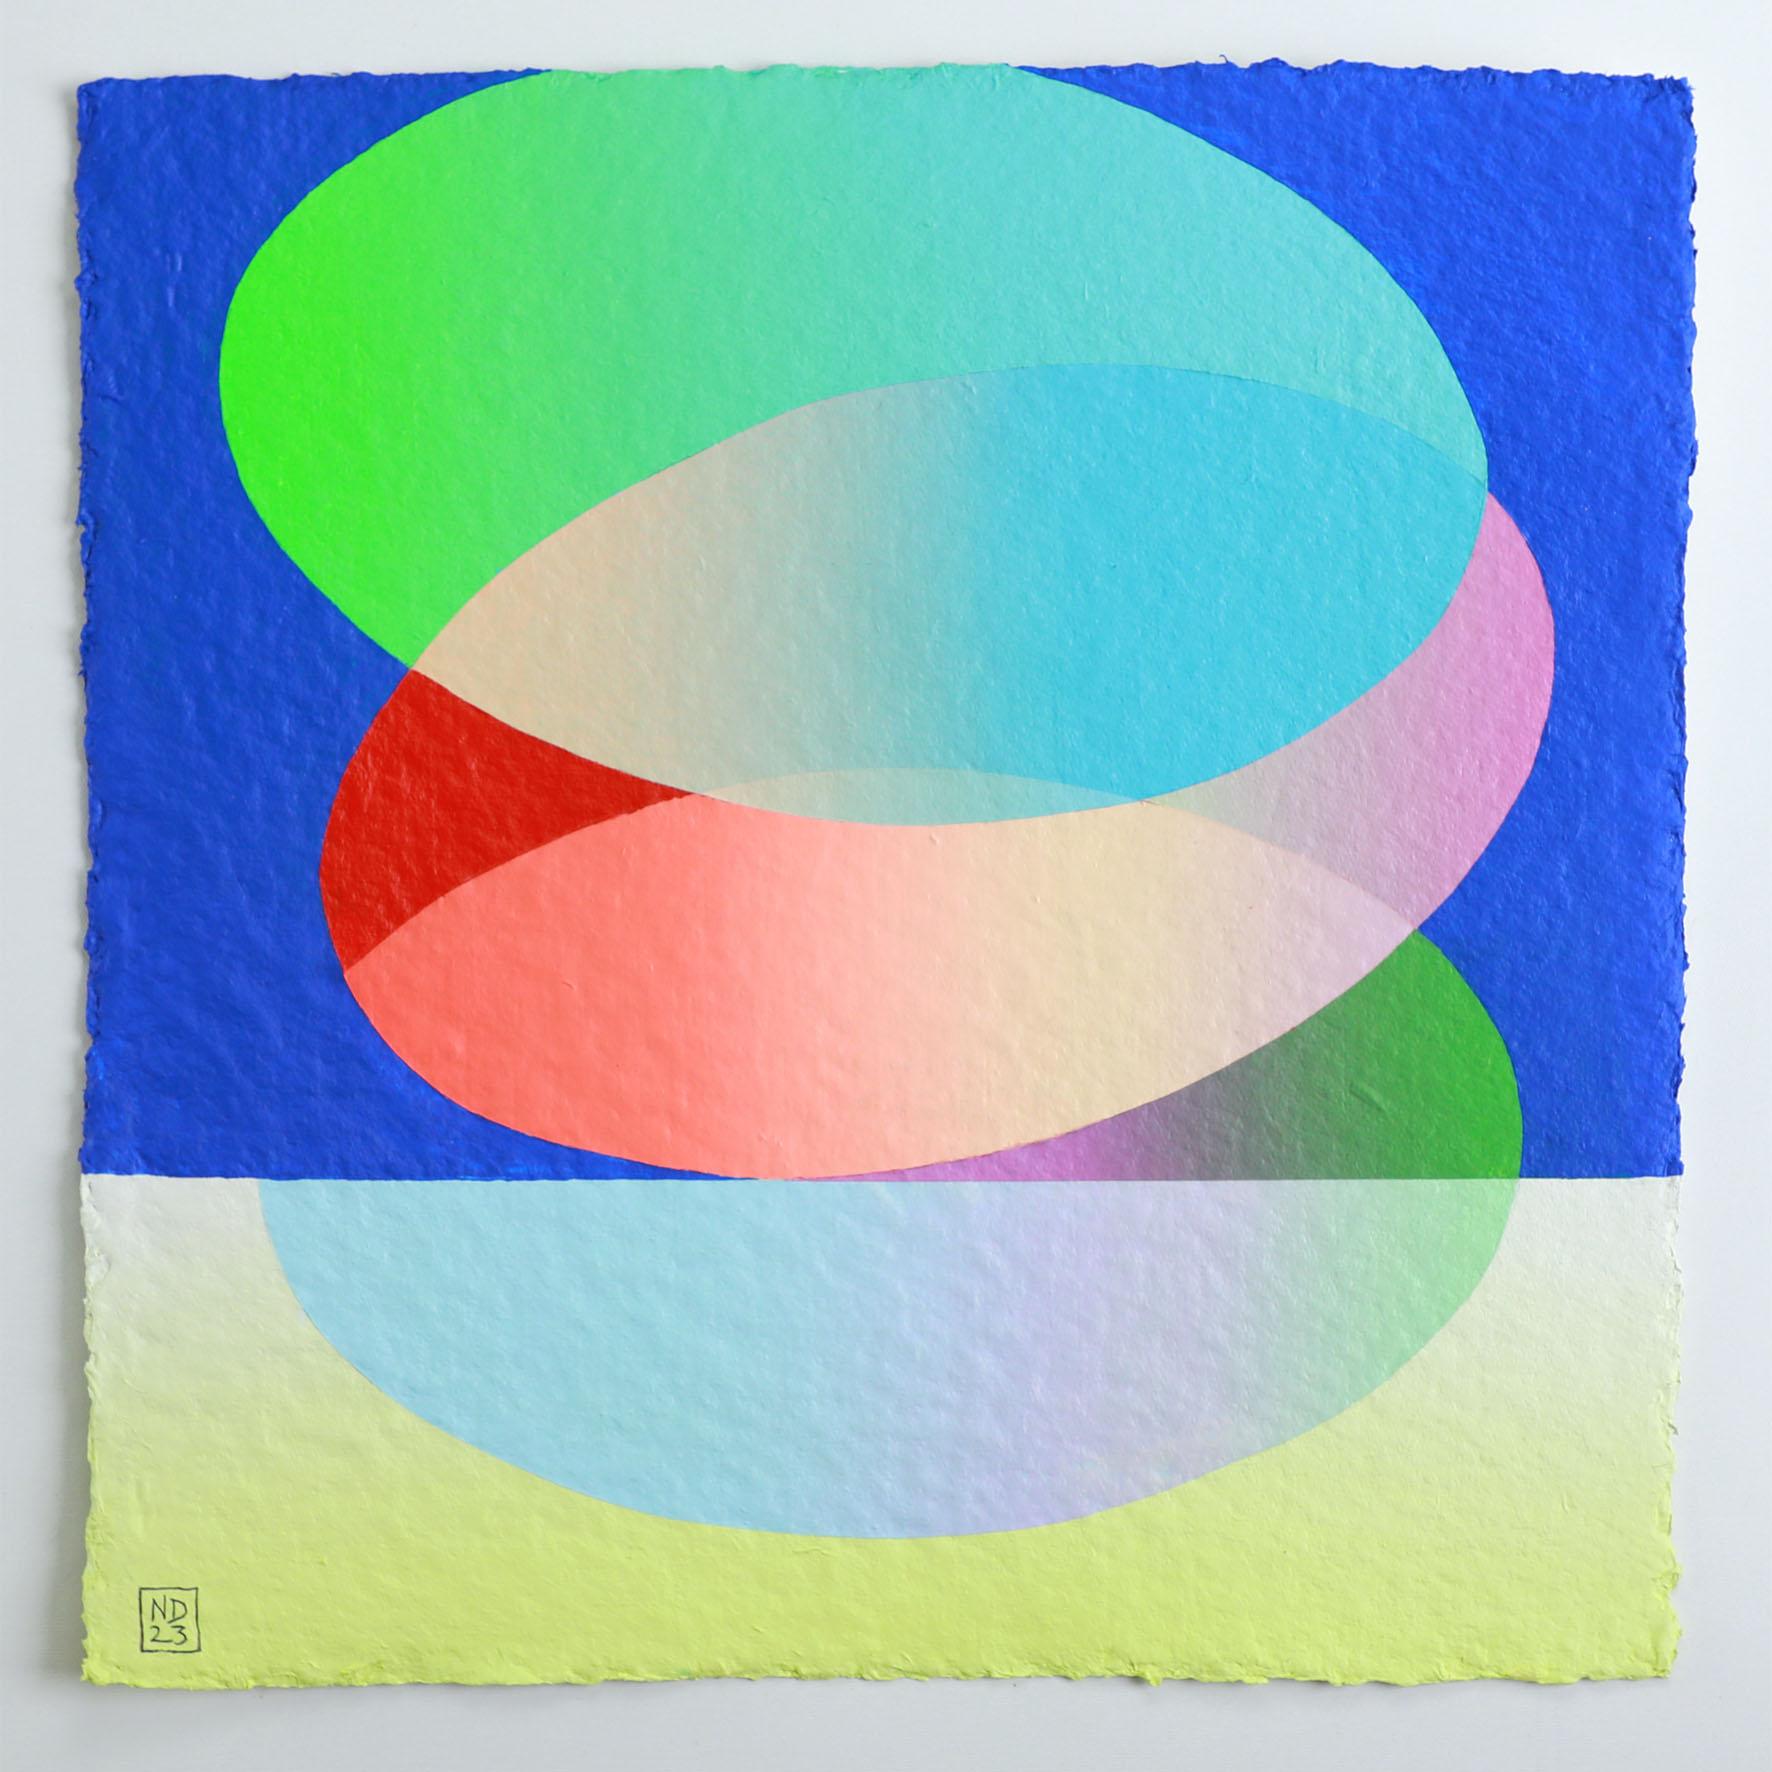 Nicolas Dubreuille is a multi-faceted abstract artist who likes to multiply mediums - sculpture, painting, drawing, photography - to explore form and colour. His artworks relate to minimalism, Pop art, and free figuration. Dubreuille's